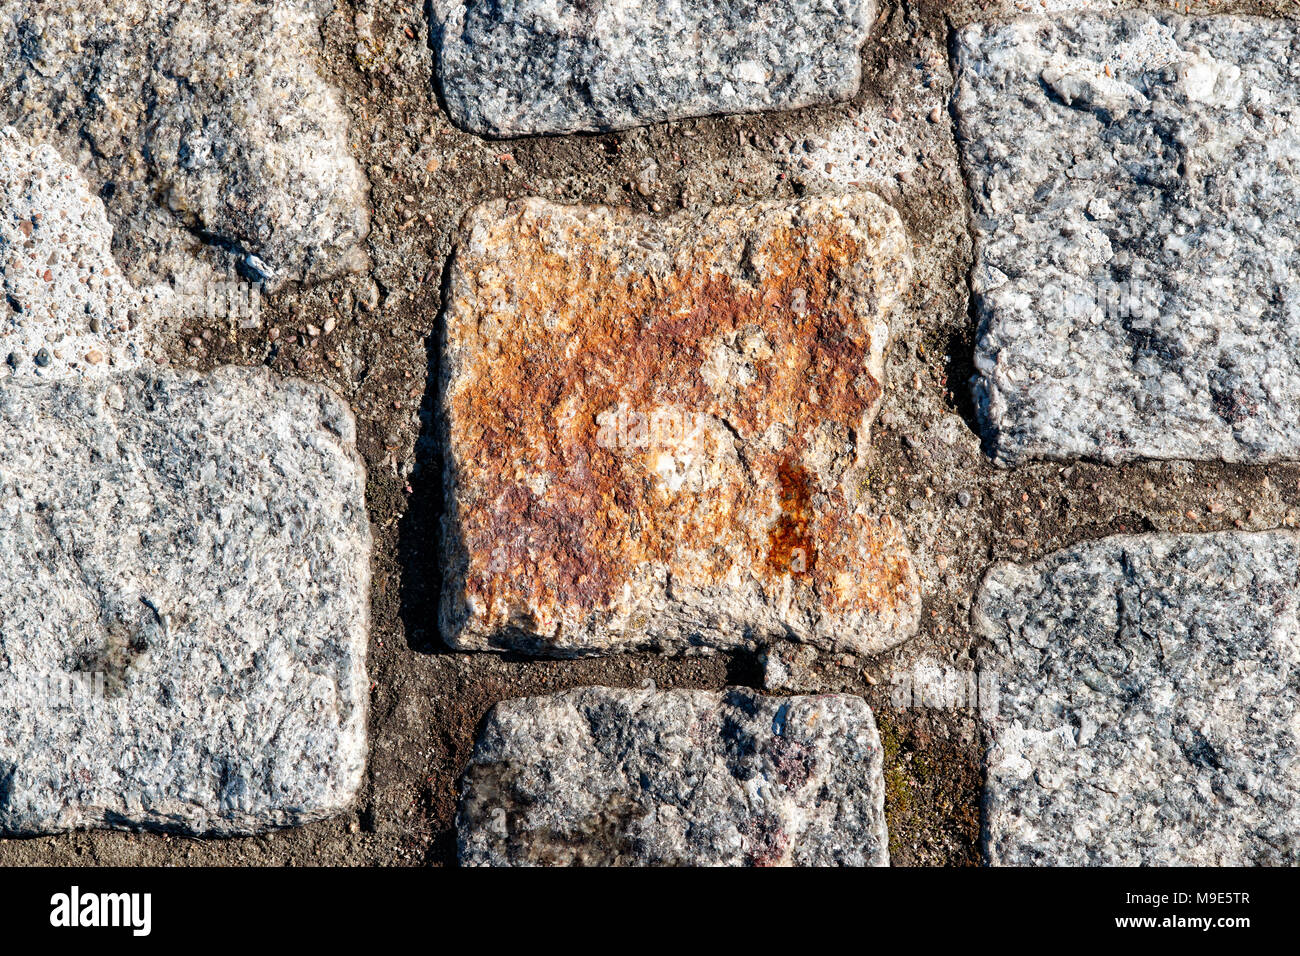 Texture of a hard rock stone paving blocks of grey and blue colors. A brown block in the middle. Grunge rough surface Stock Photo